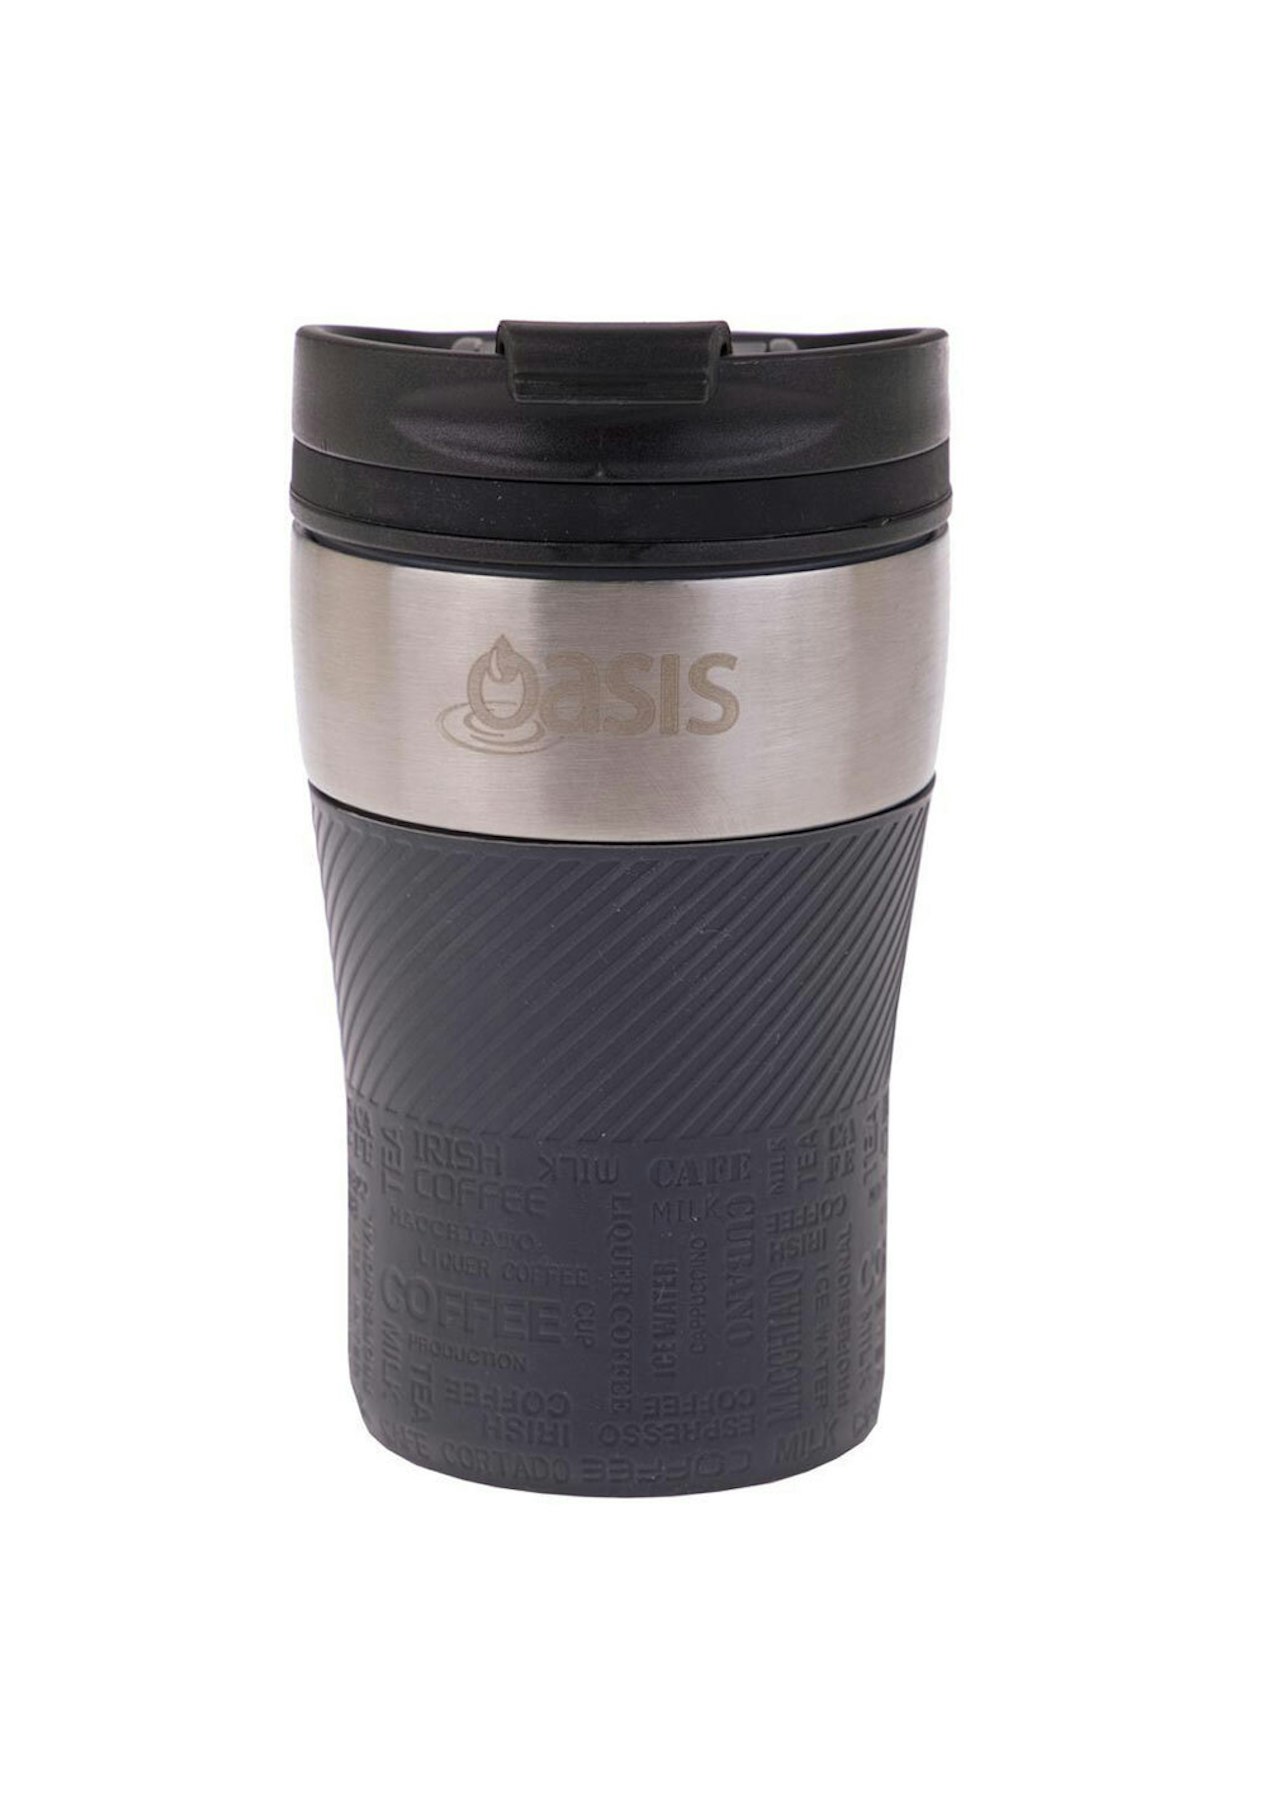 2PK Oasis 280ml Cafe Stainless Steel Insulated Travel Drinkware Cup Charcoal GRY 